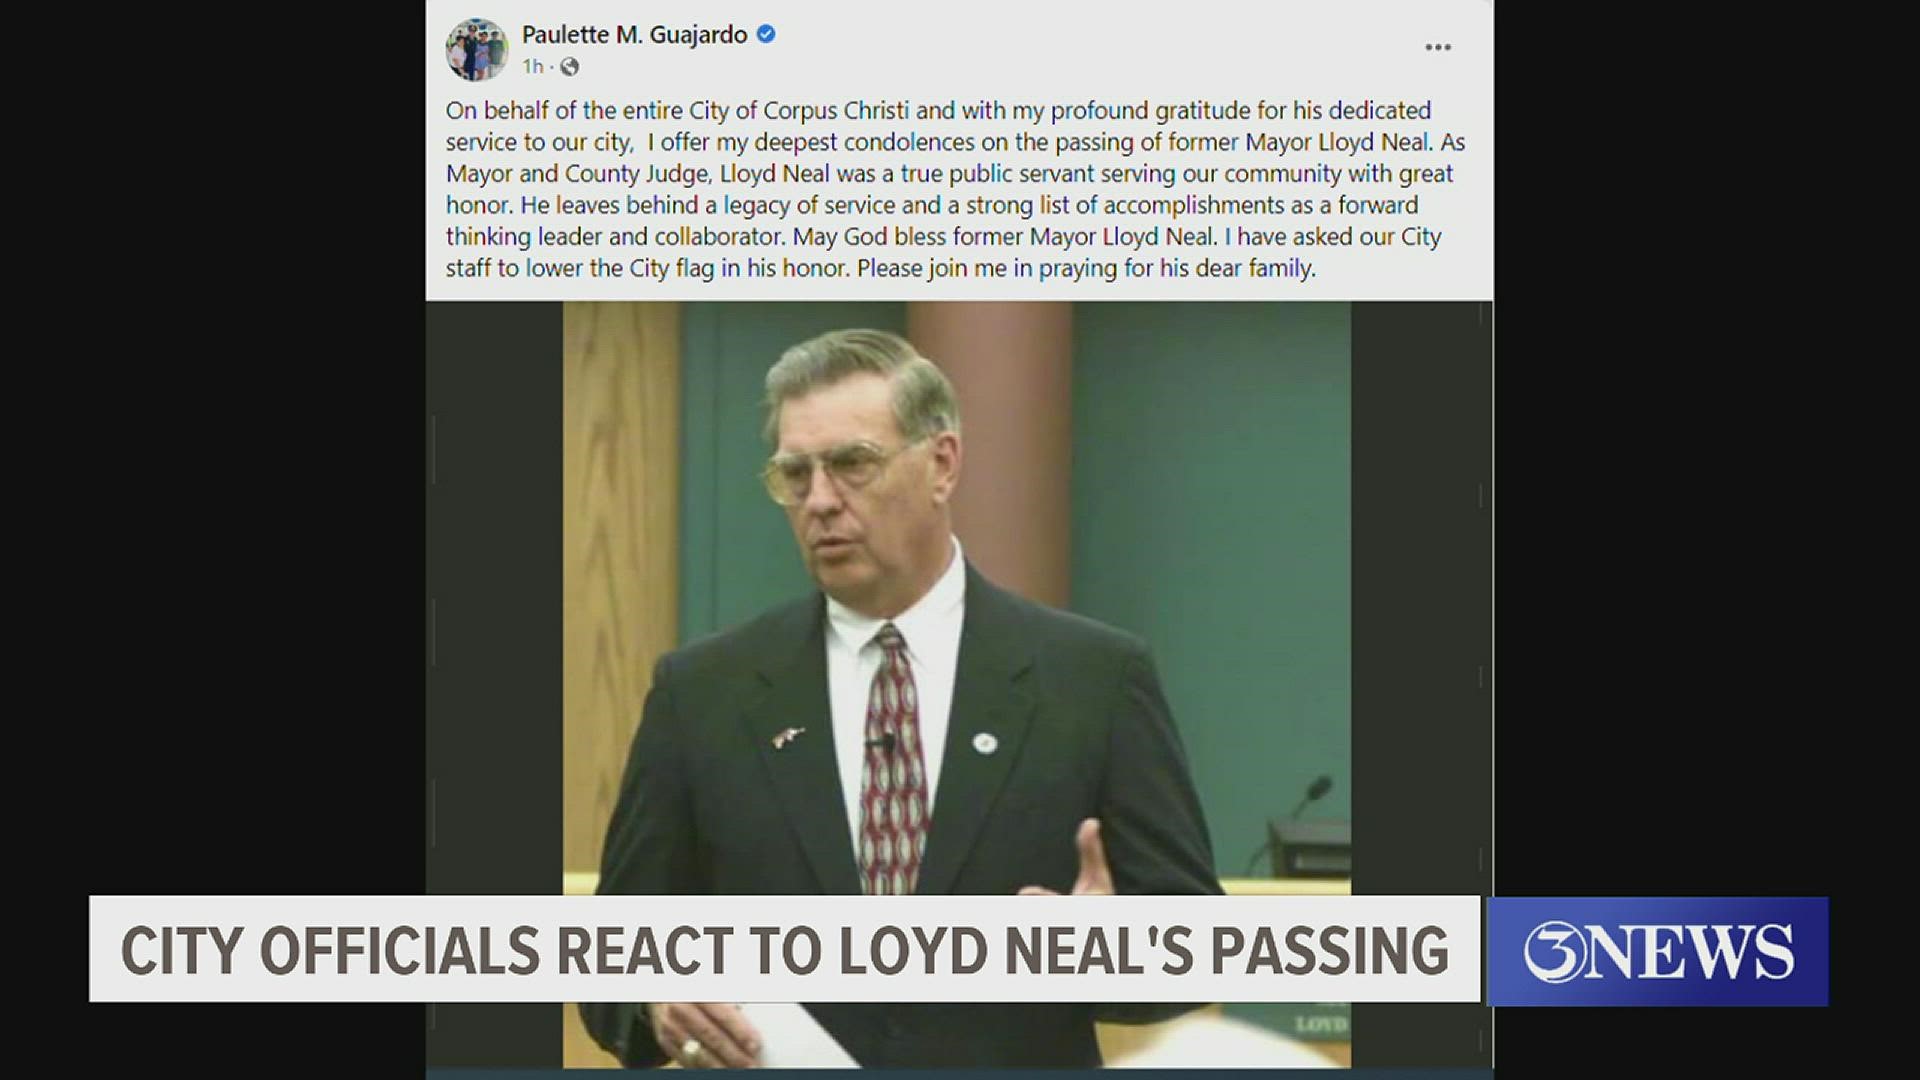 Neal was a former Mayor of Corpus Christi and former Nueces County Judge.